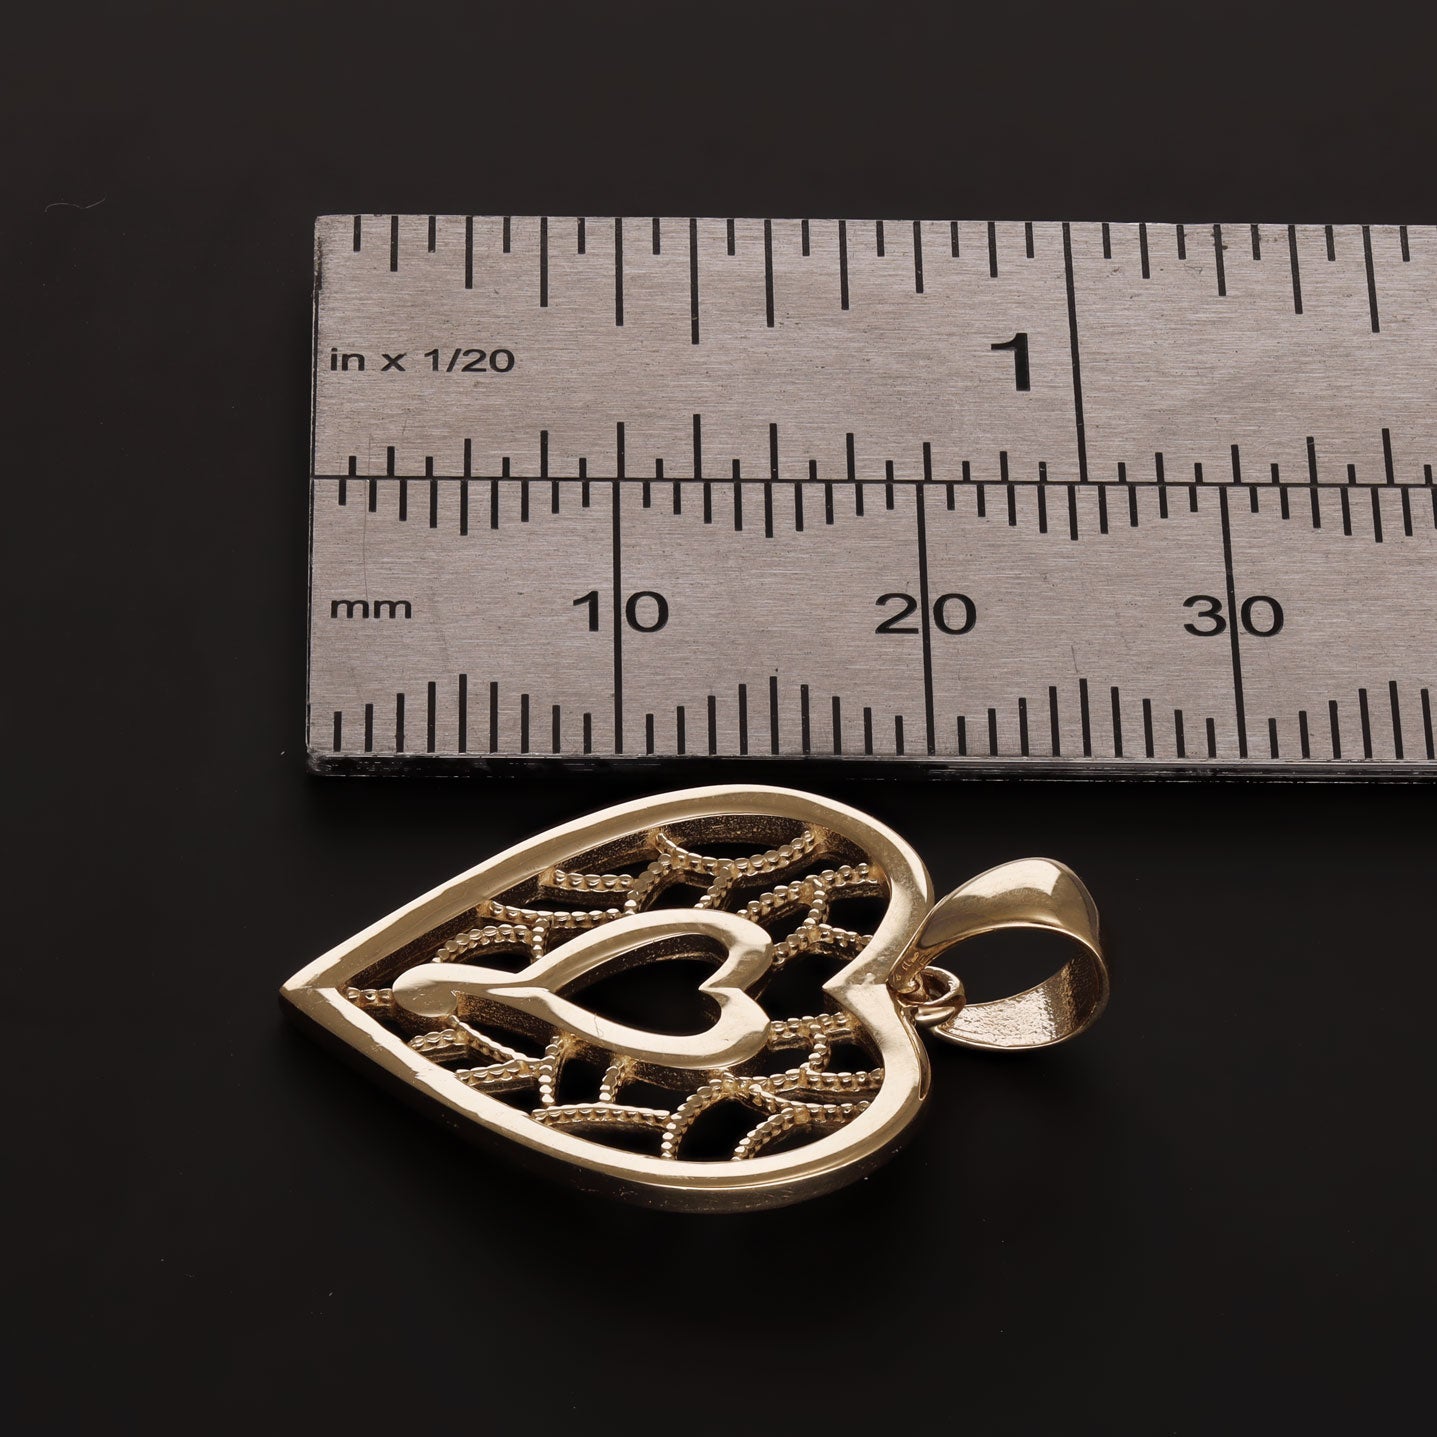 9ct Gold Patterned Double Heart Pendant - 27mm - FJewellery